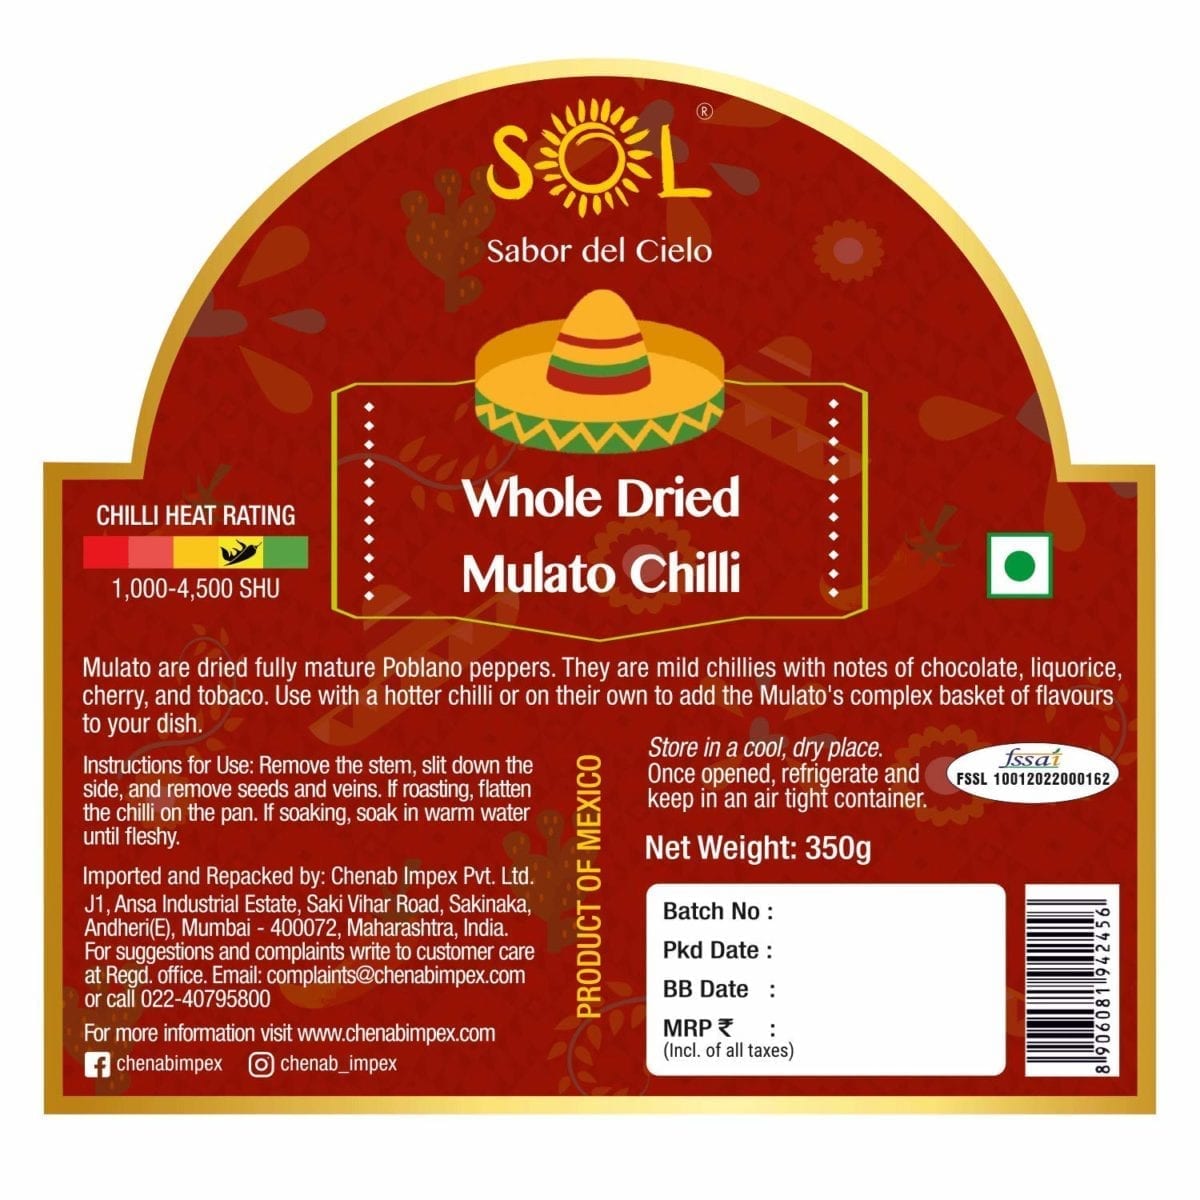 sol-whole-dried-mulato-chillies-with-stem-chenab-gourmet